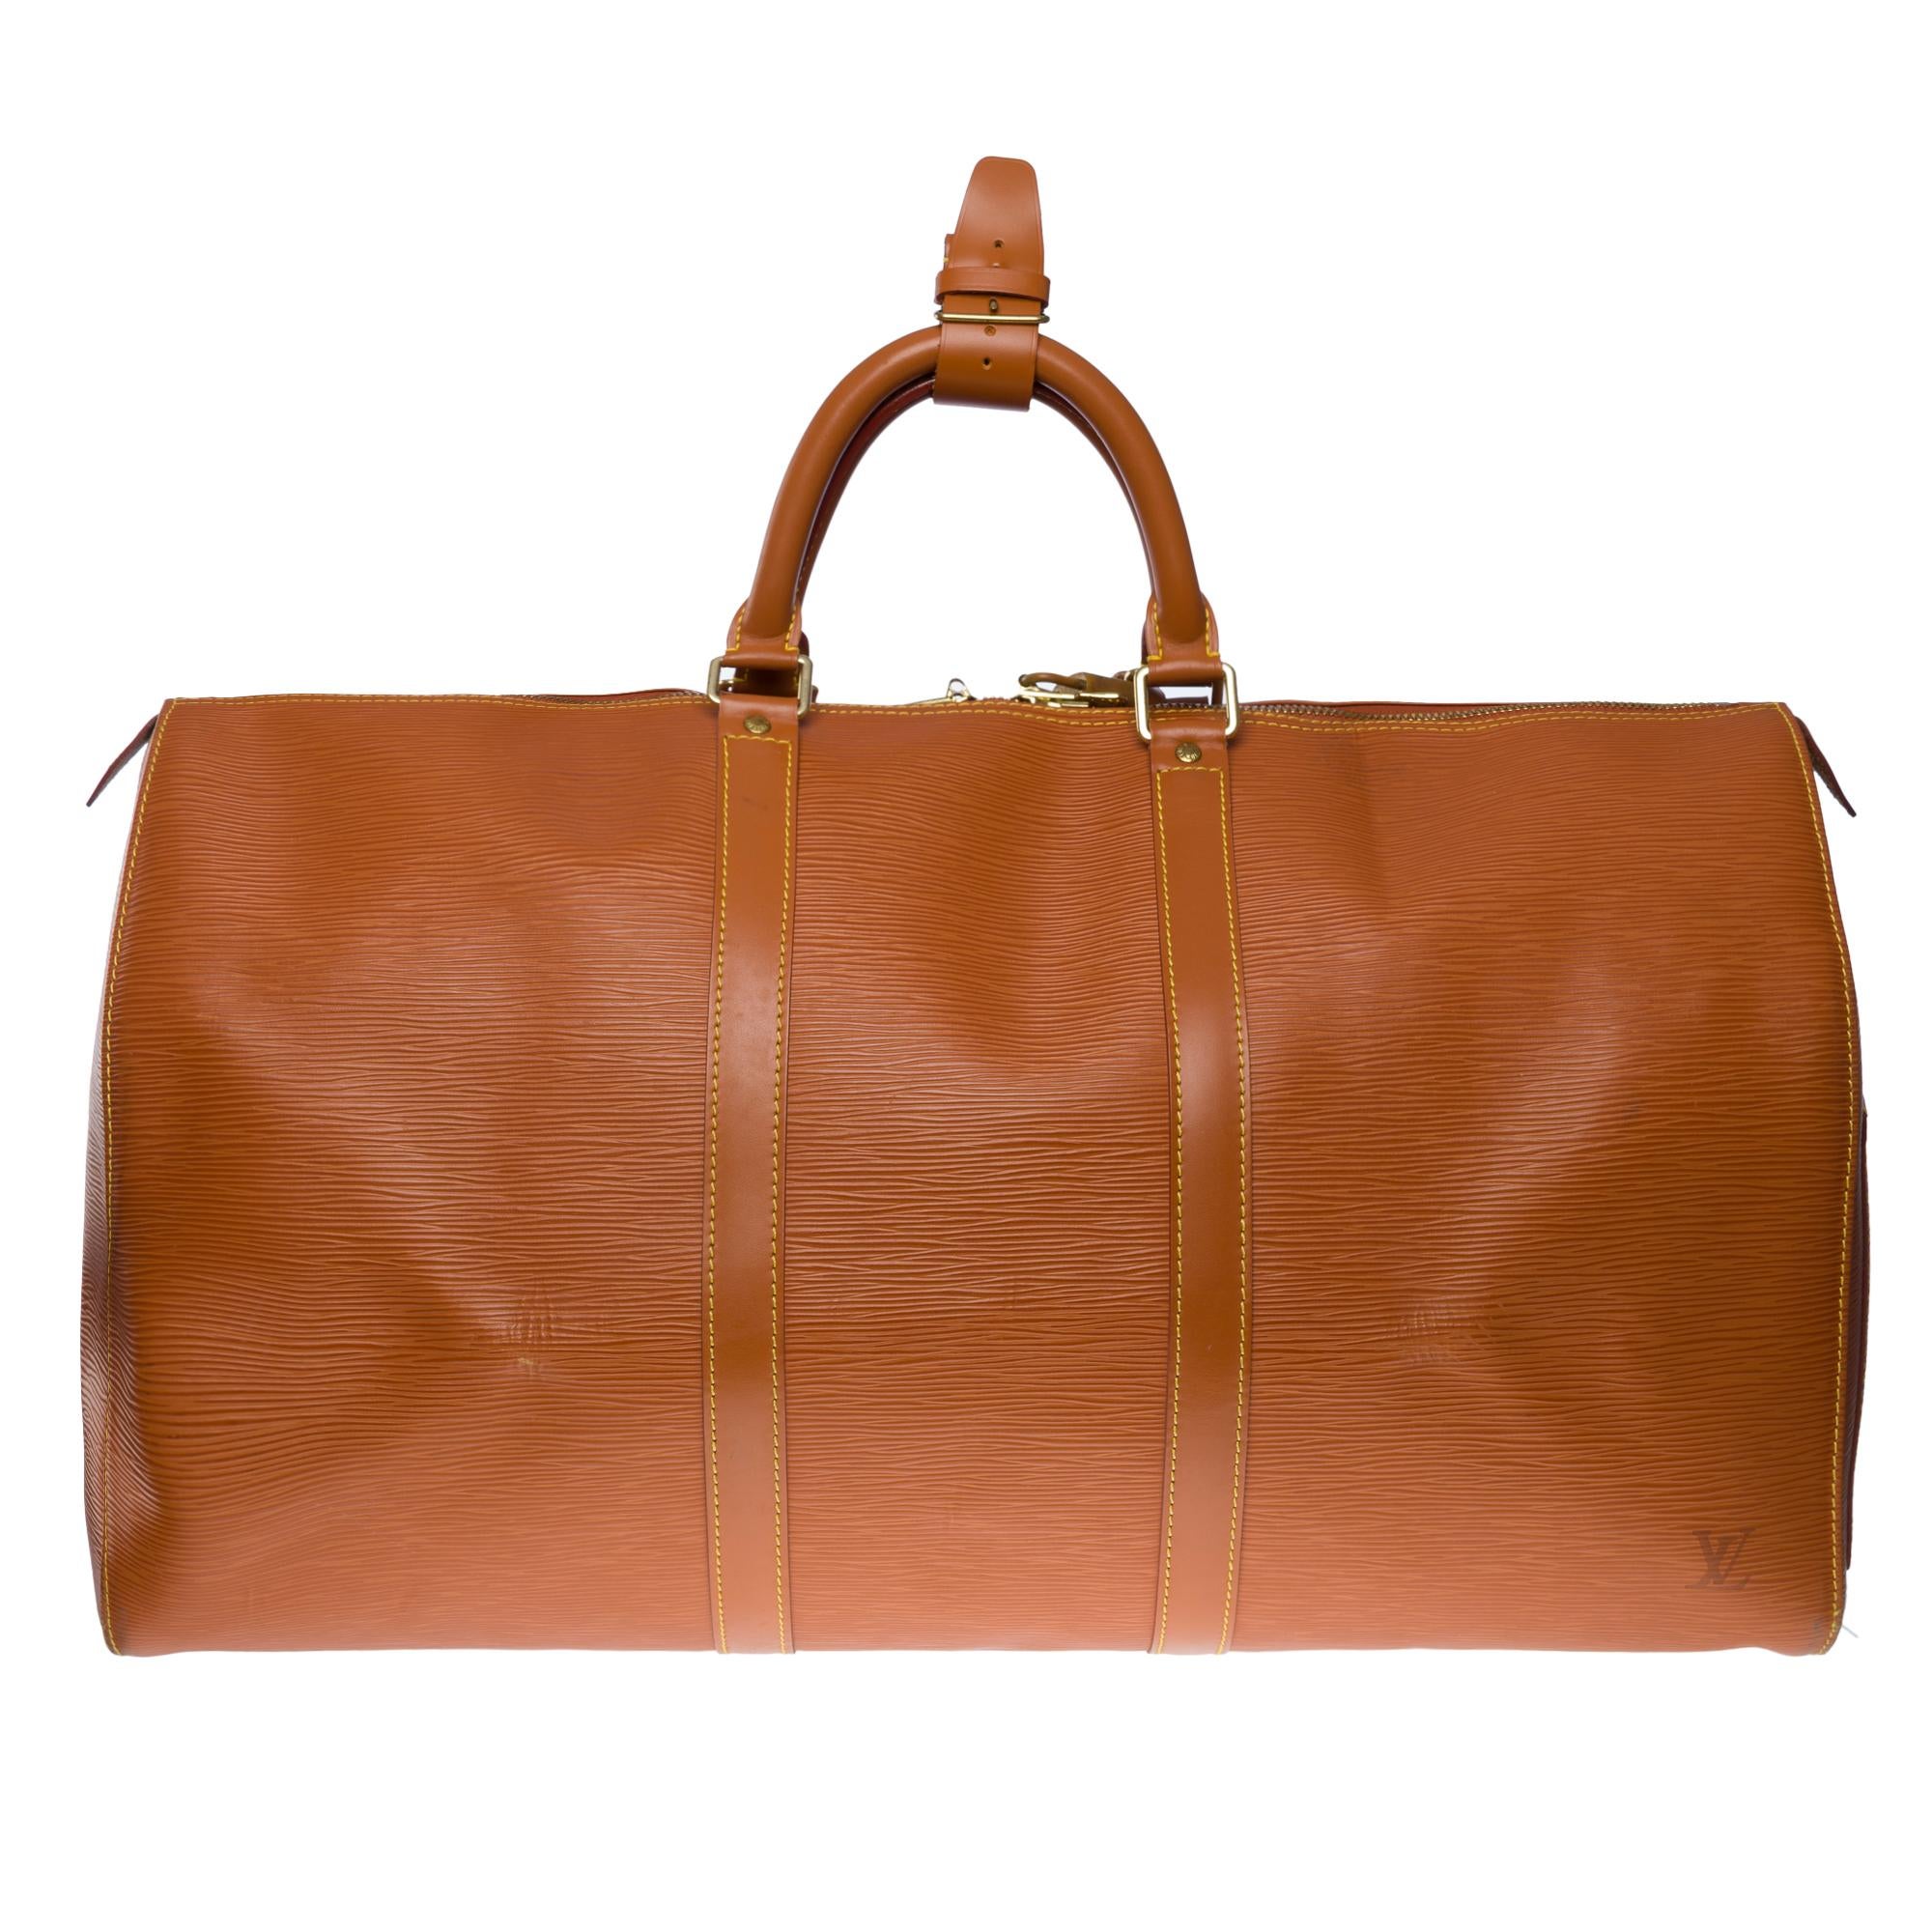 The Very Chic Louis Vuitton Keepall 50 Travel bag in cognac epi leather, double slider zipper, double cognac leather handle and hand-carry
Zip closure
A side patch pocket
Cognac suede inner lining
Signature “LOUIS VUITTON, Made in